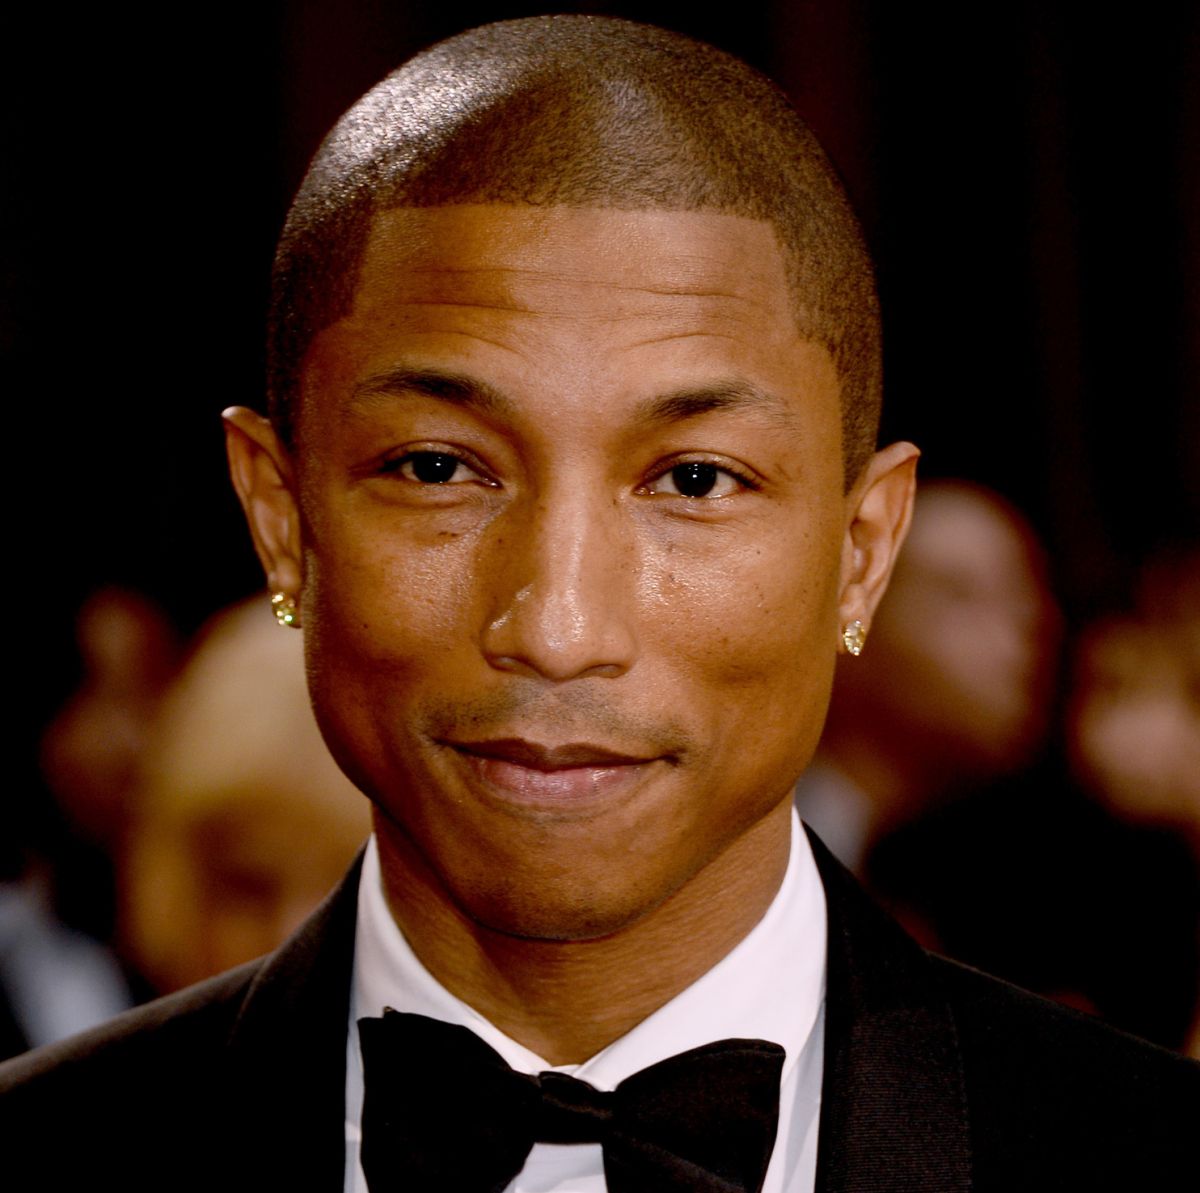 Video: Moment Peta Activists Disrupt Pharrell'S Party At Louis Vuitton Headquarters In France 5